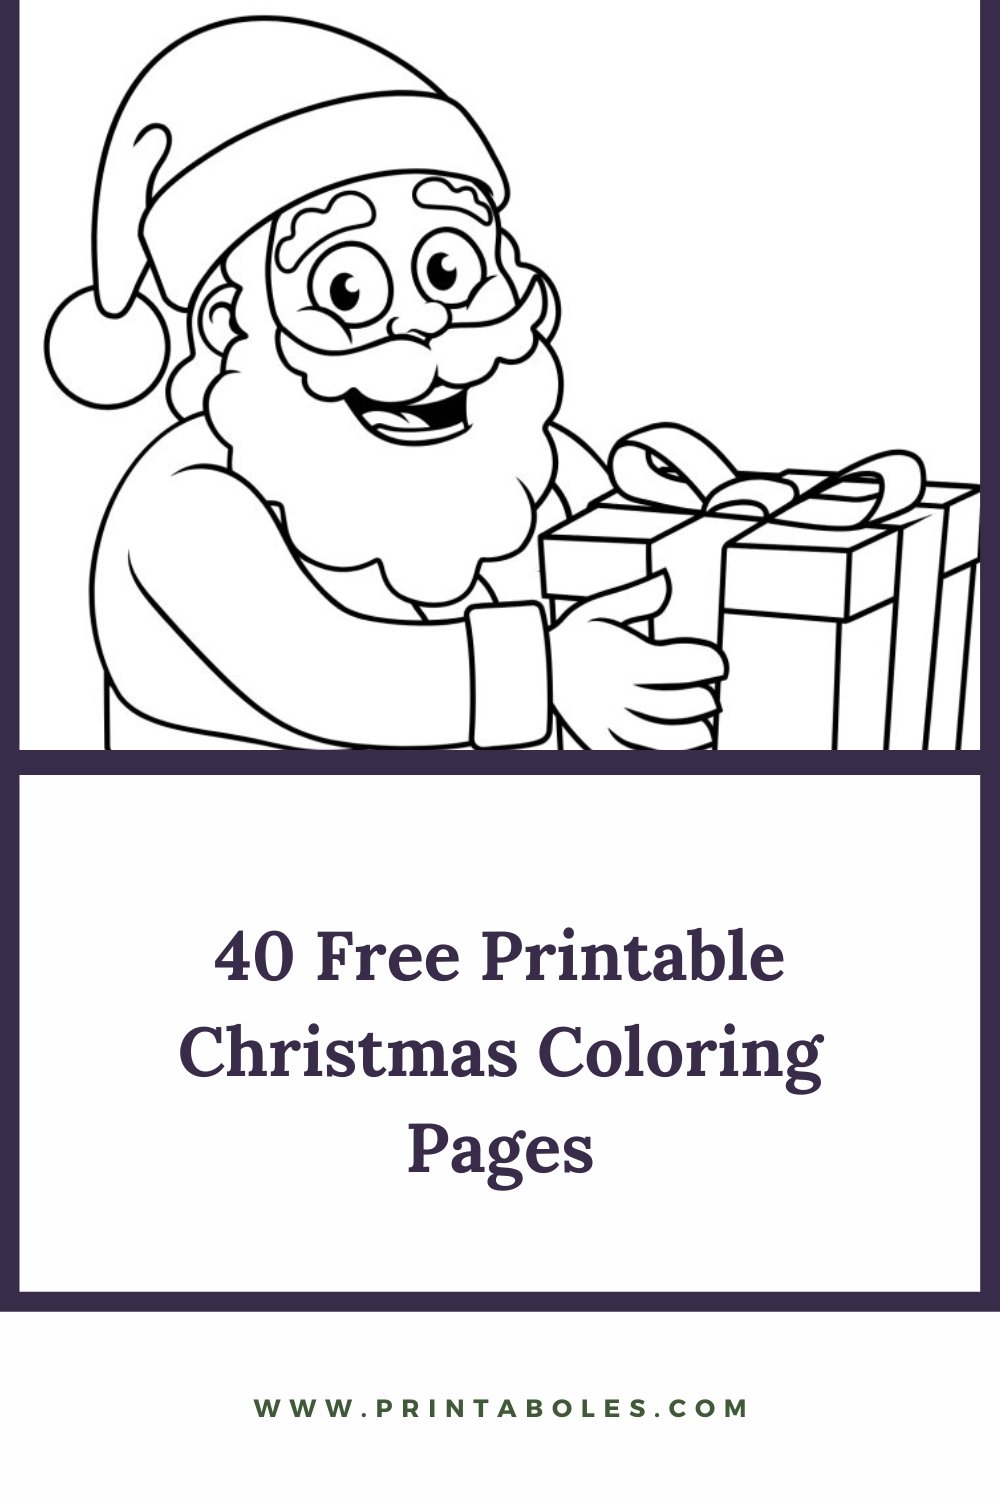 40 Free Printable Christmas Coloring Pages